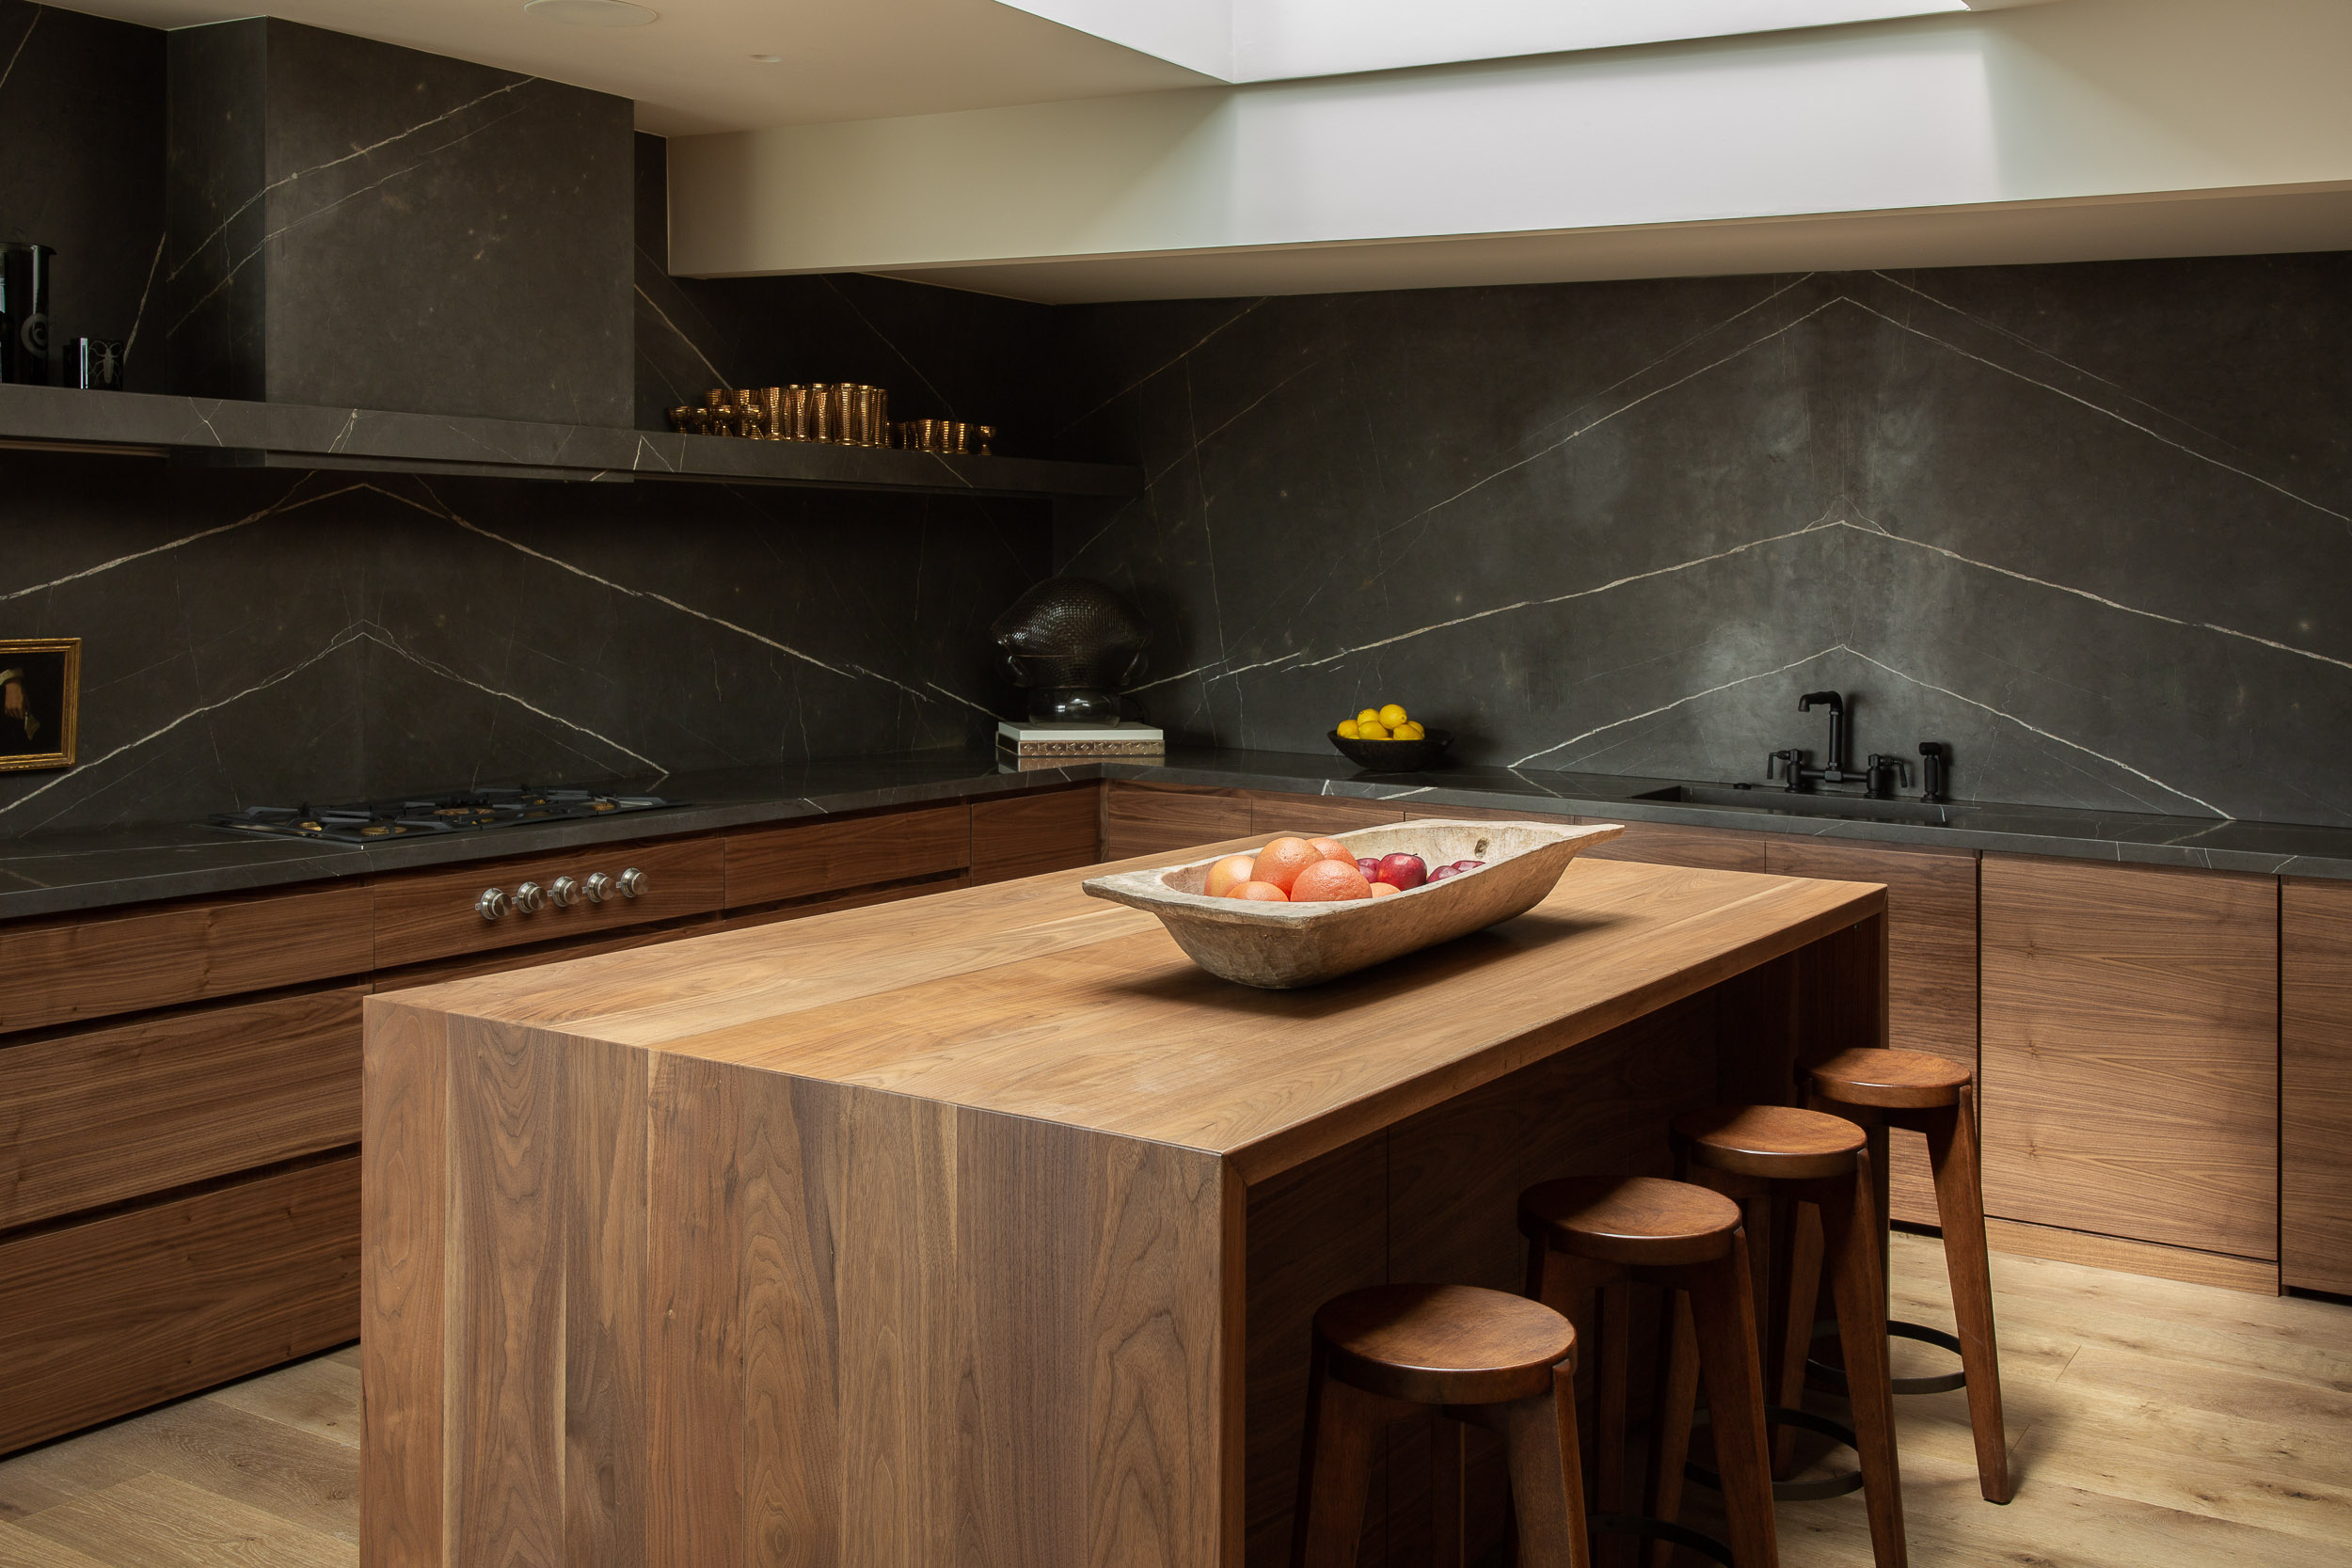 Kitchen design trends in 2023 are likely to include black marble, as with the Rising Glen project by OSKLO in Effect Magazine